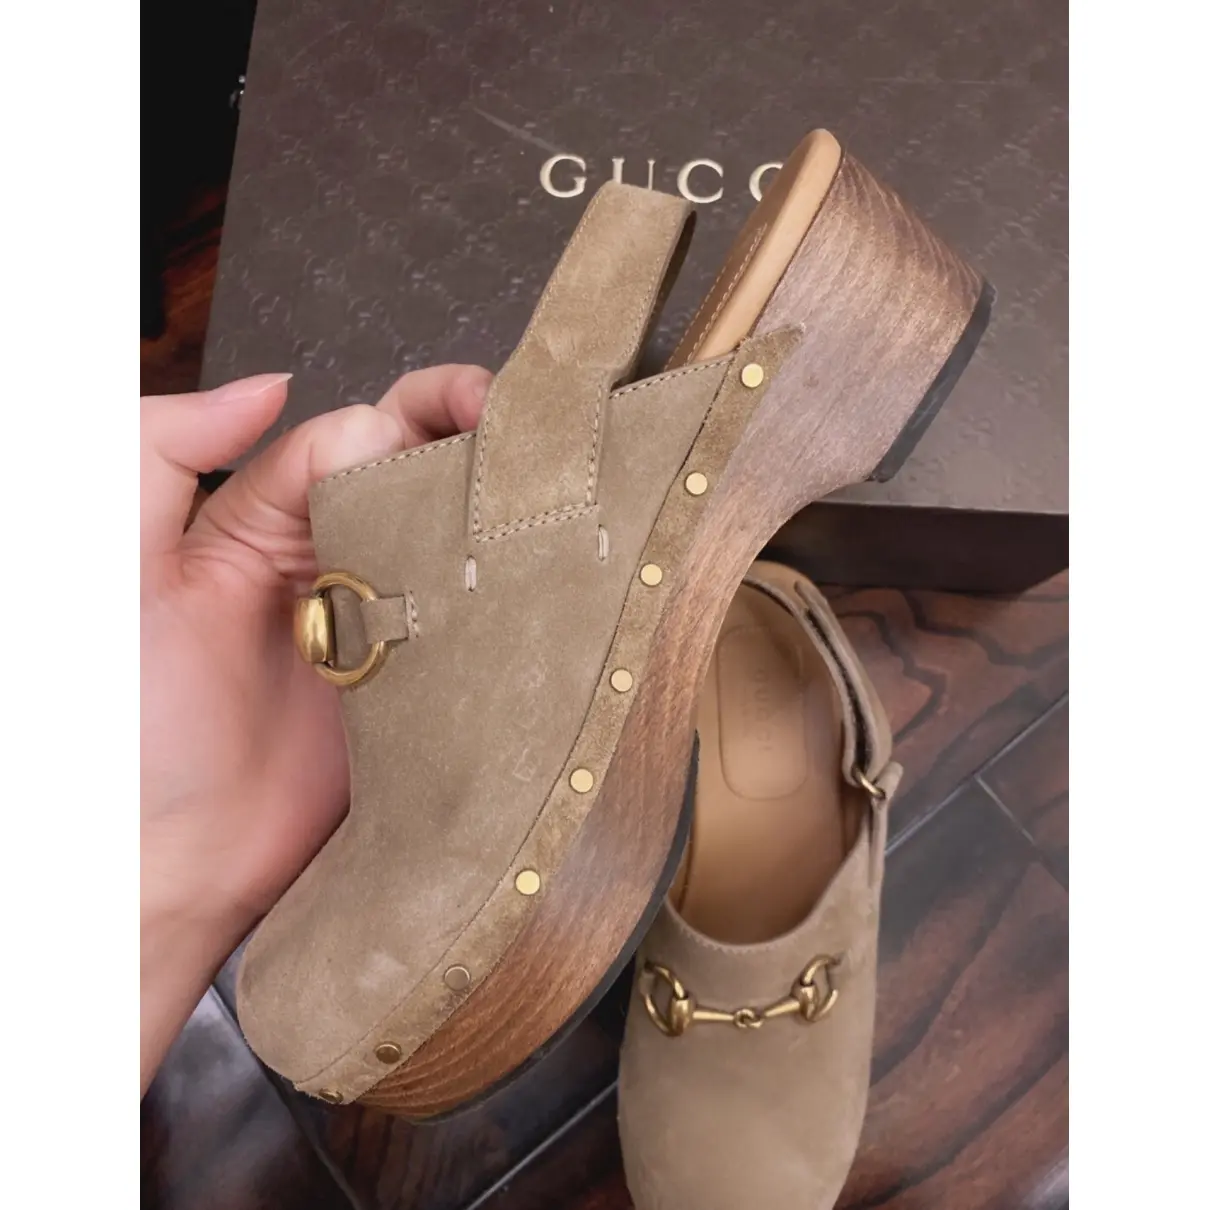 Buy Gucci Mules & clogs online